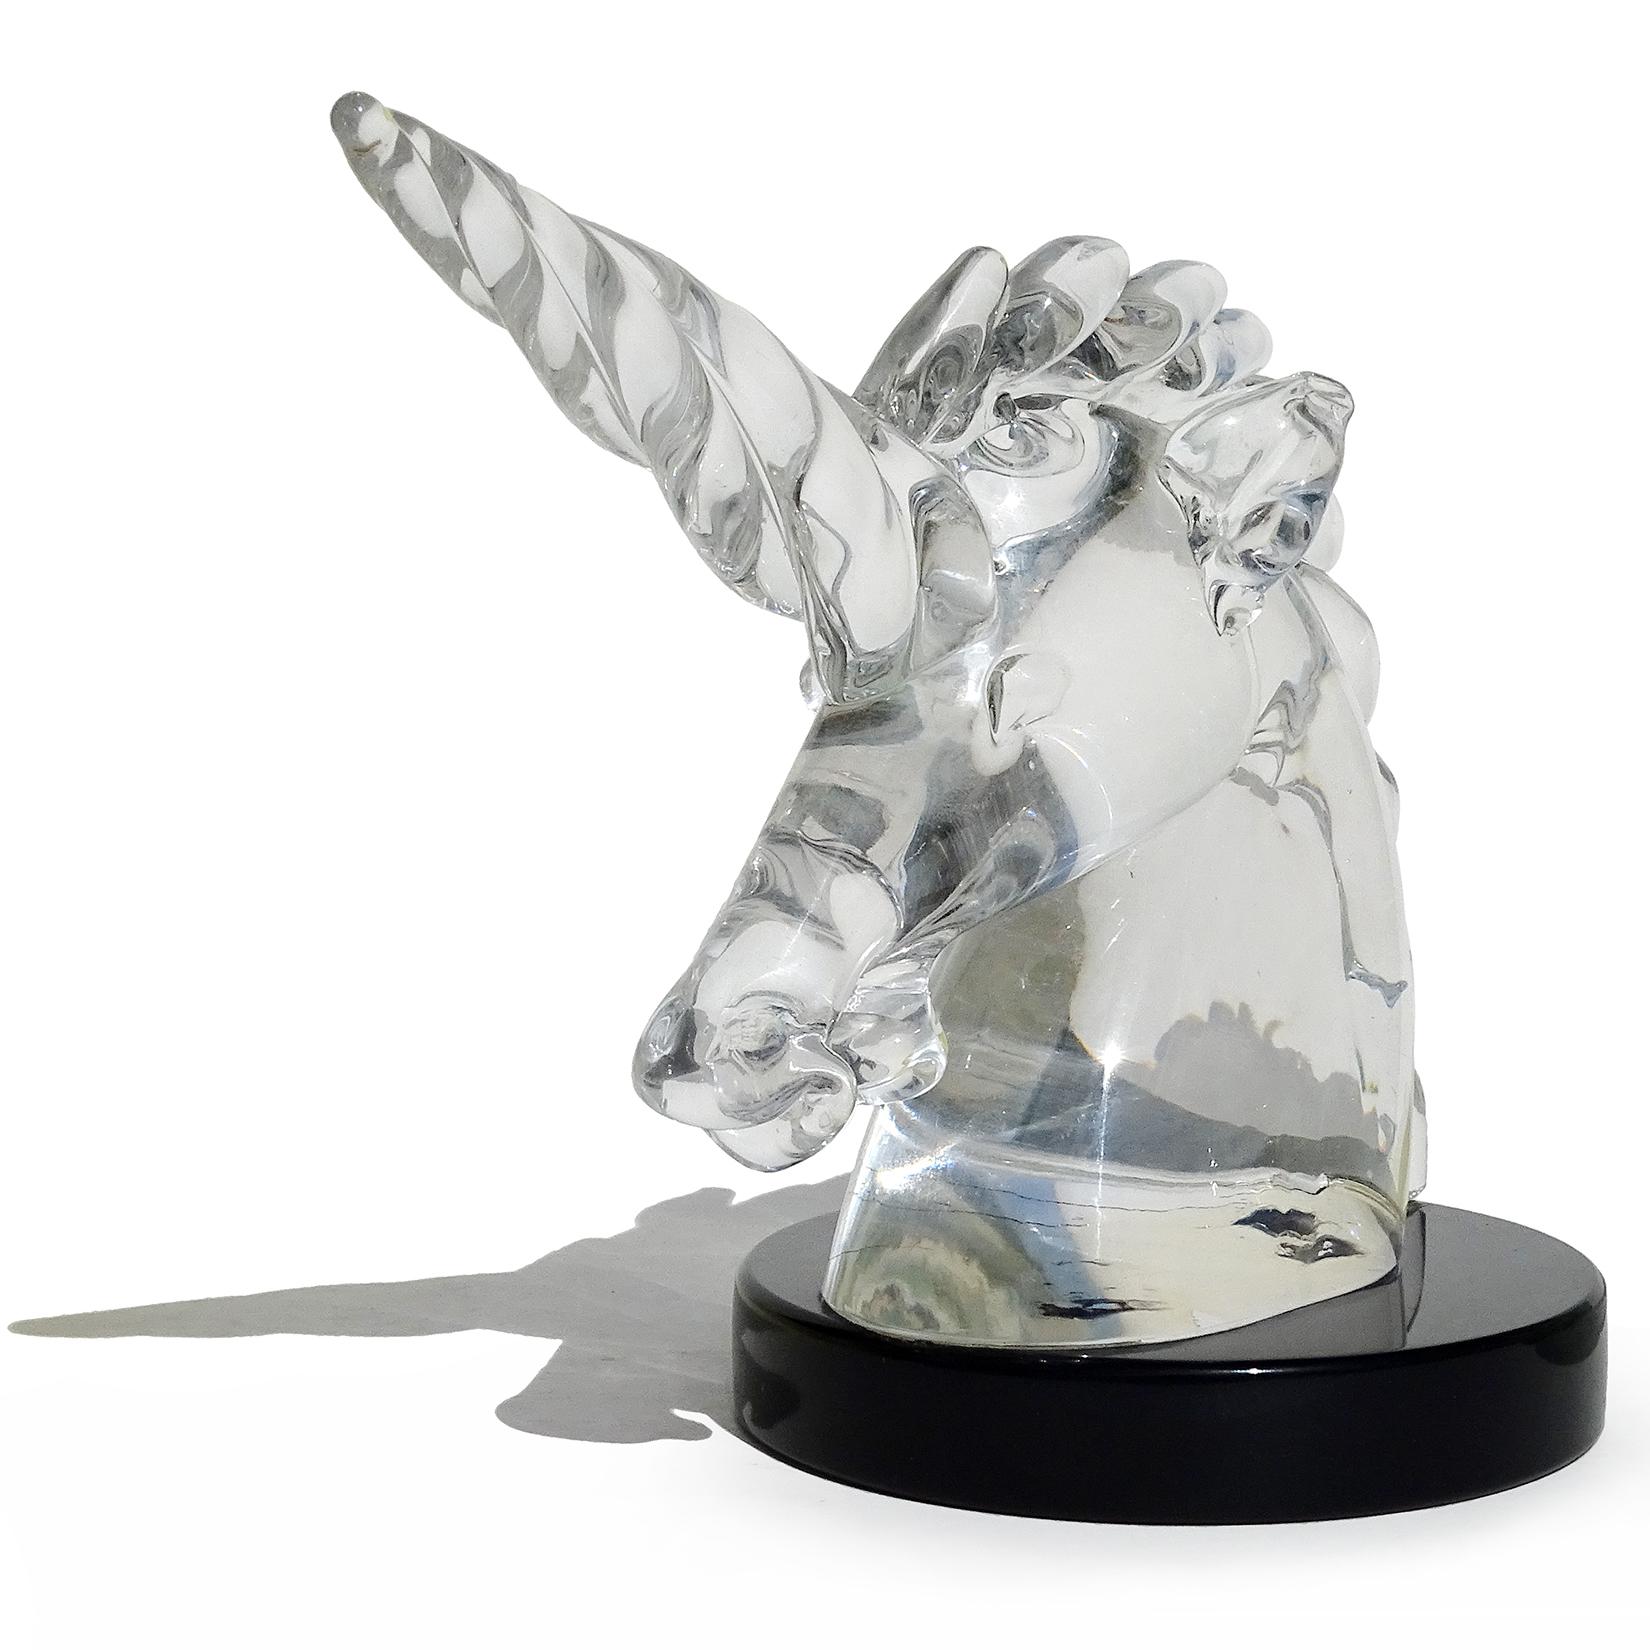 Beautiful vintage Murano handblown crystal clear Italian art glass unicorn head sculpture on black base. Documented to designer Archimede Seguso, with original label still attached. It reads 